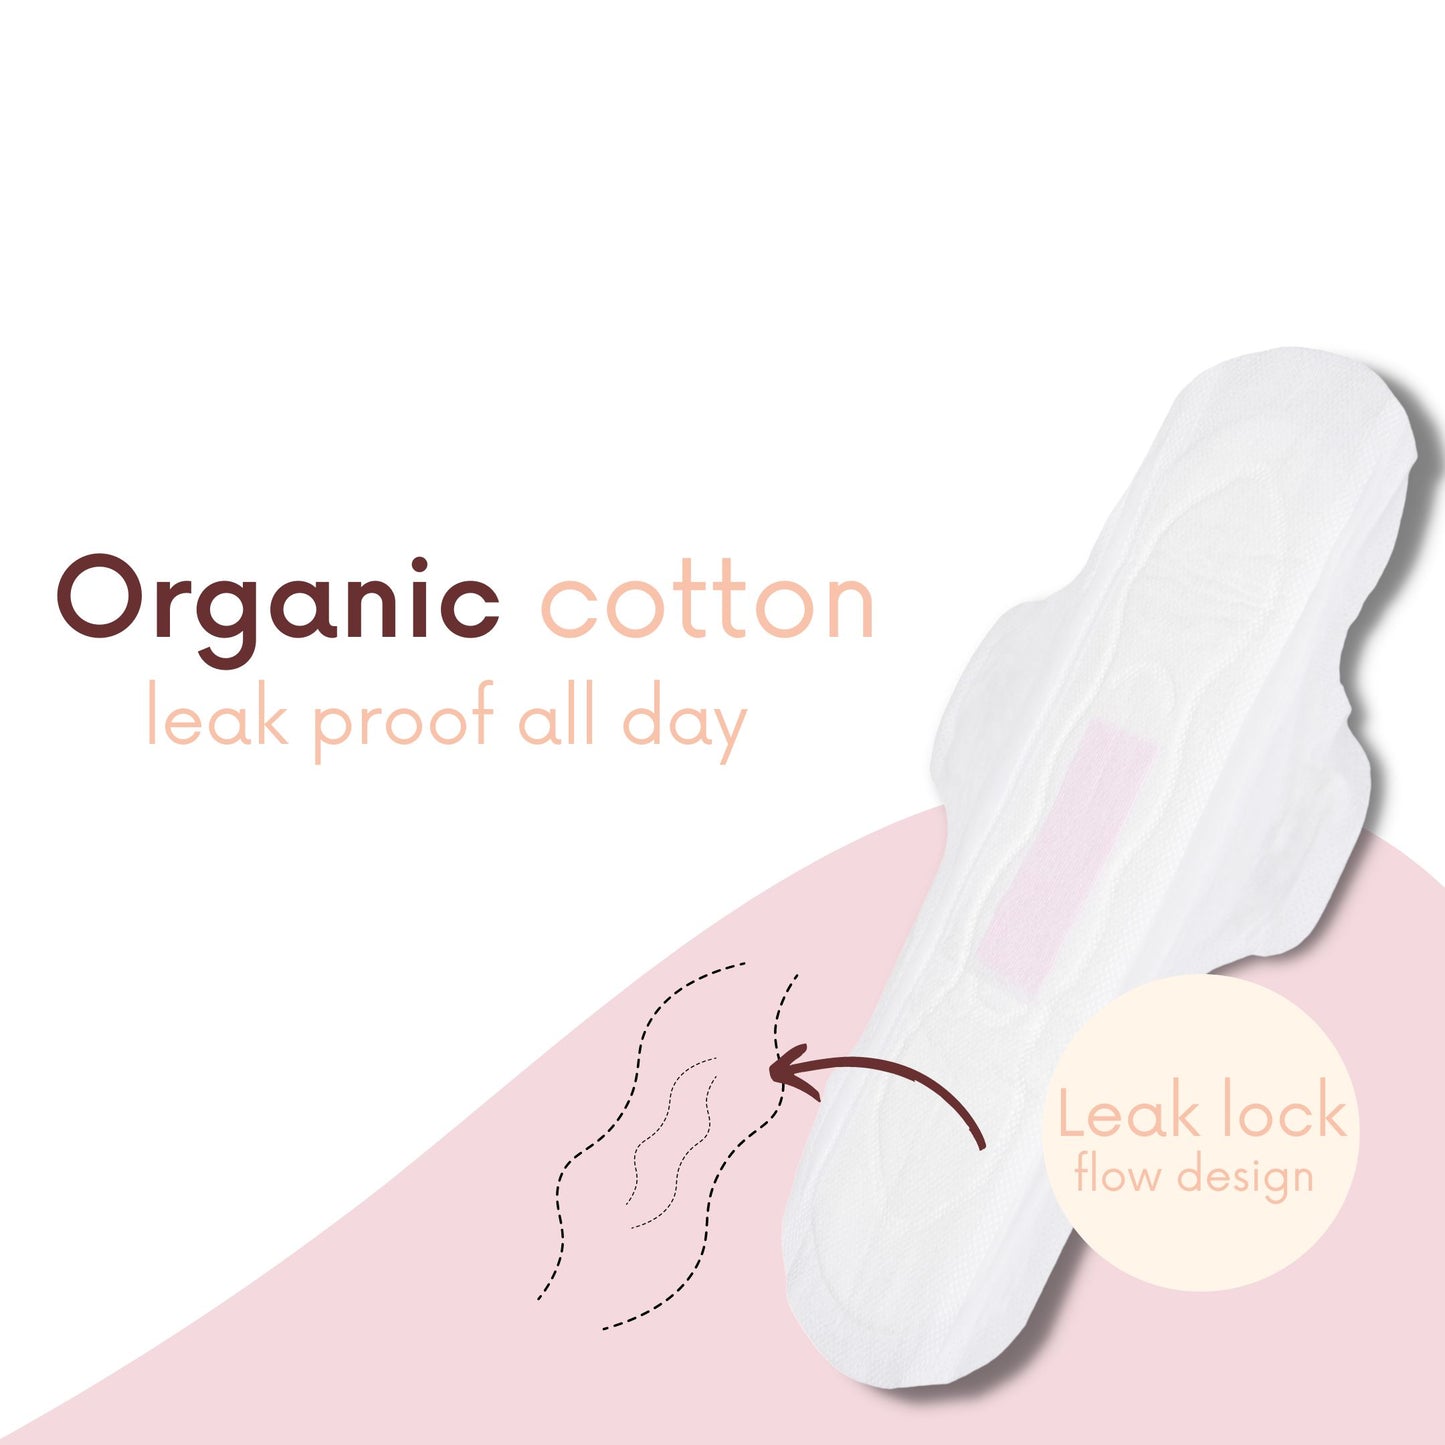 PLASTFREE 100% Organic Cotton Sanitary Pads Night (Pack of 12-120 Pads) MULTIPACK OFFER  Save £6